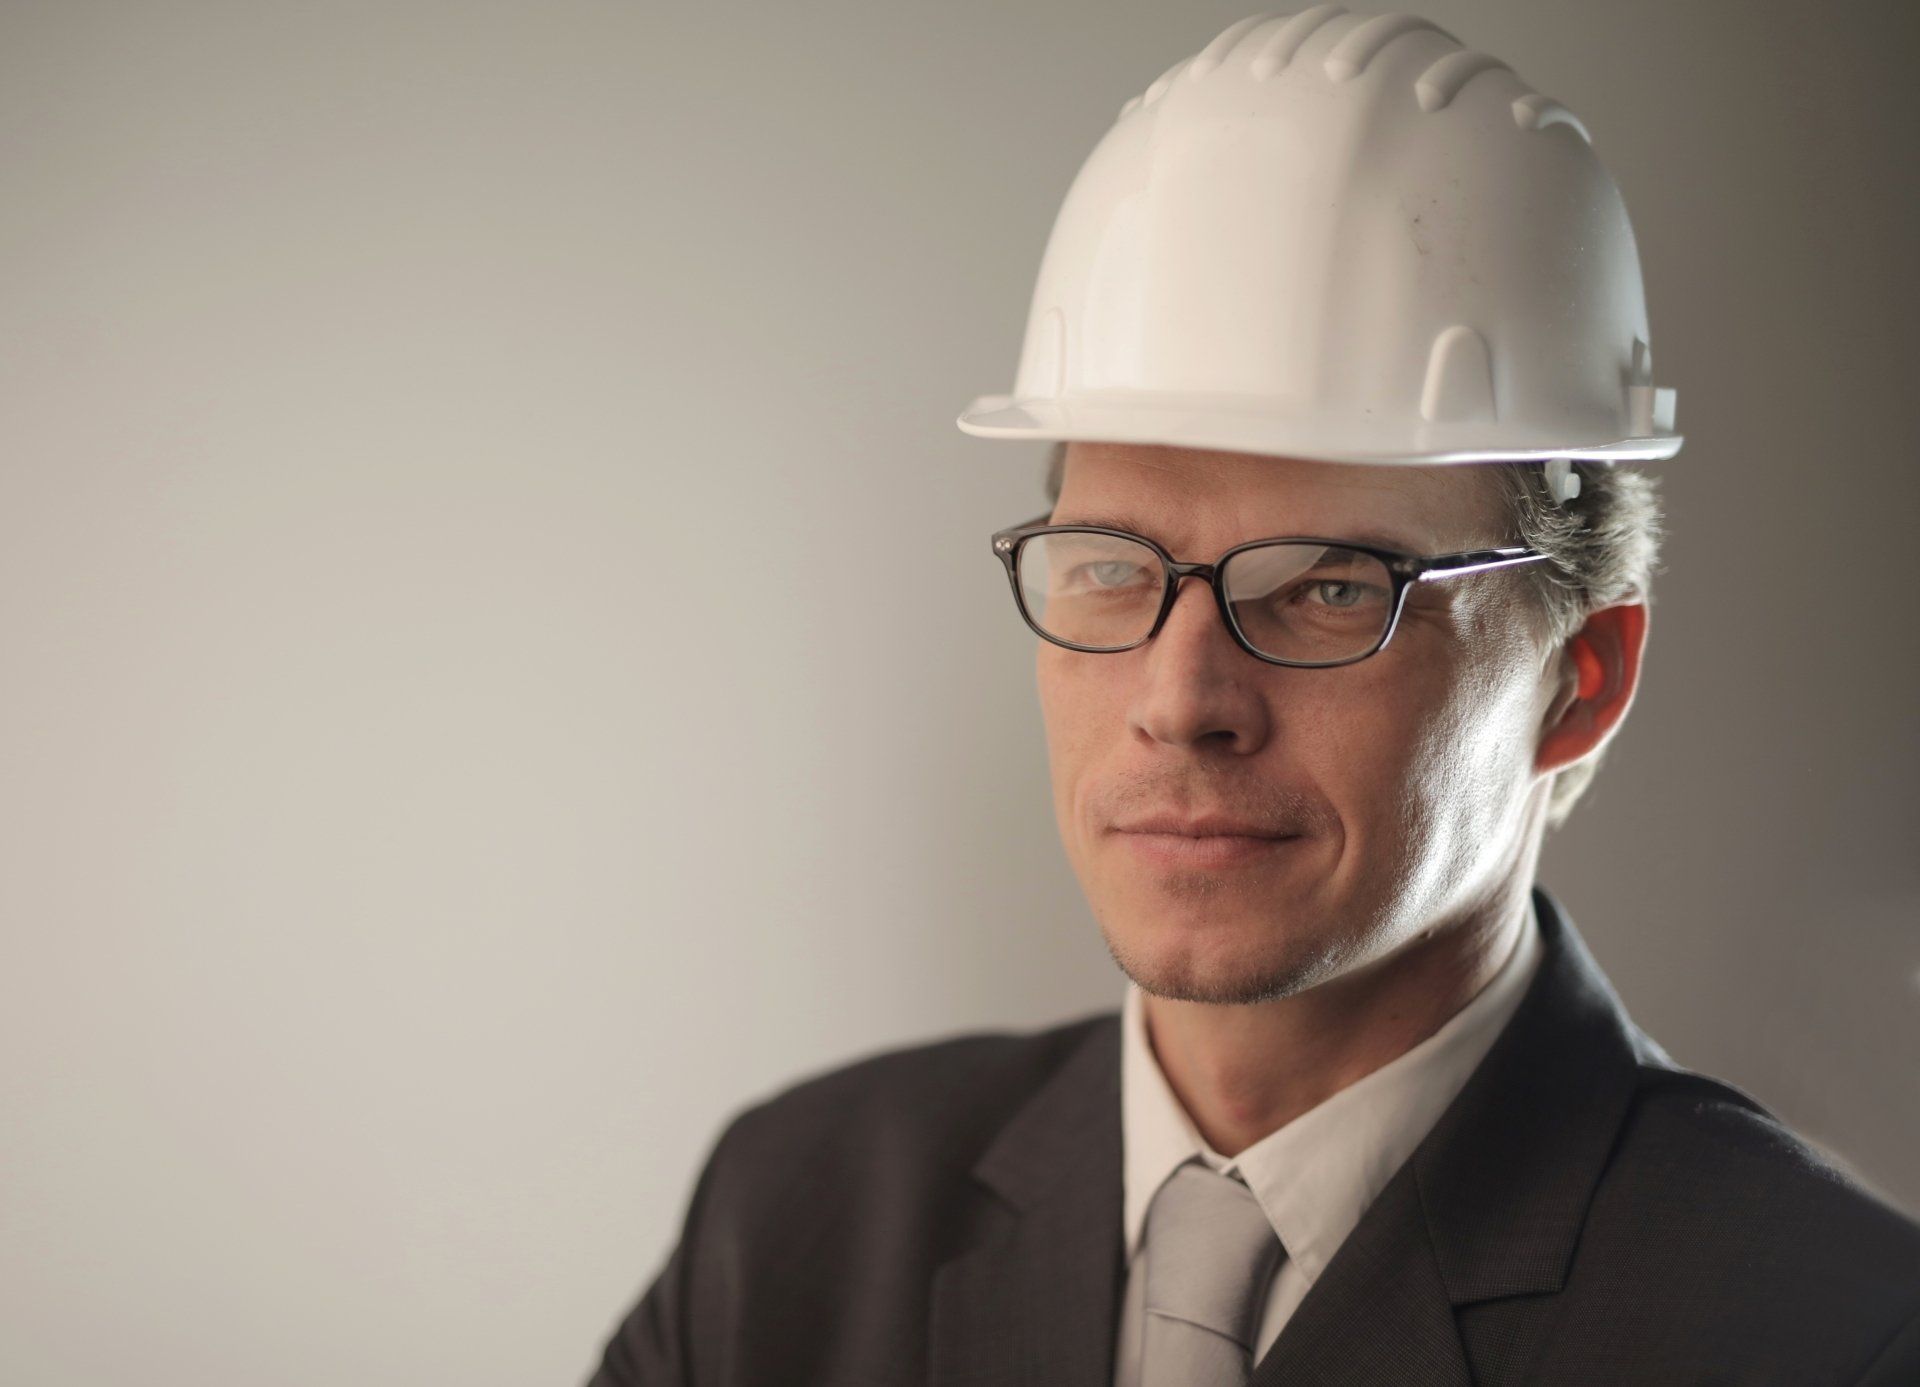 Reliability Engineer wearing a hard hat